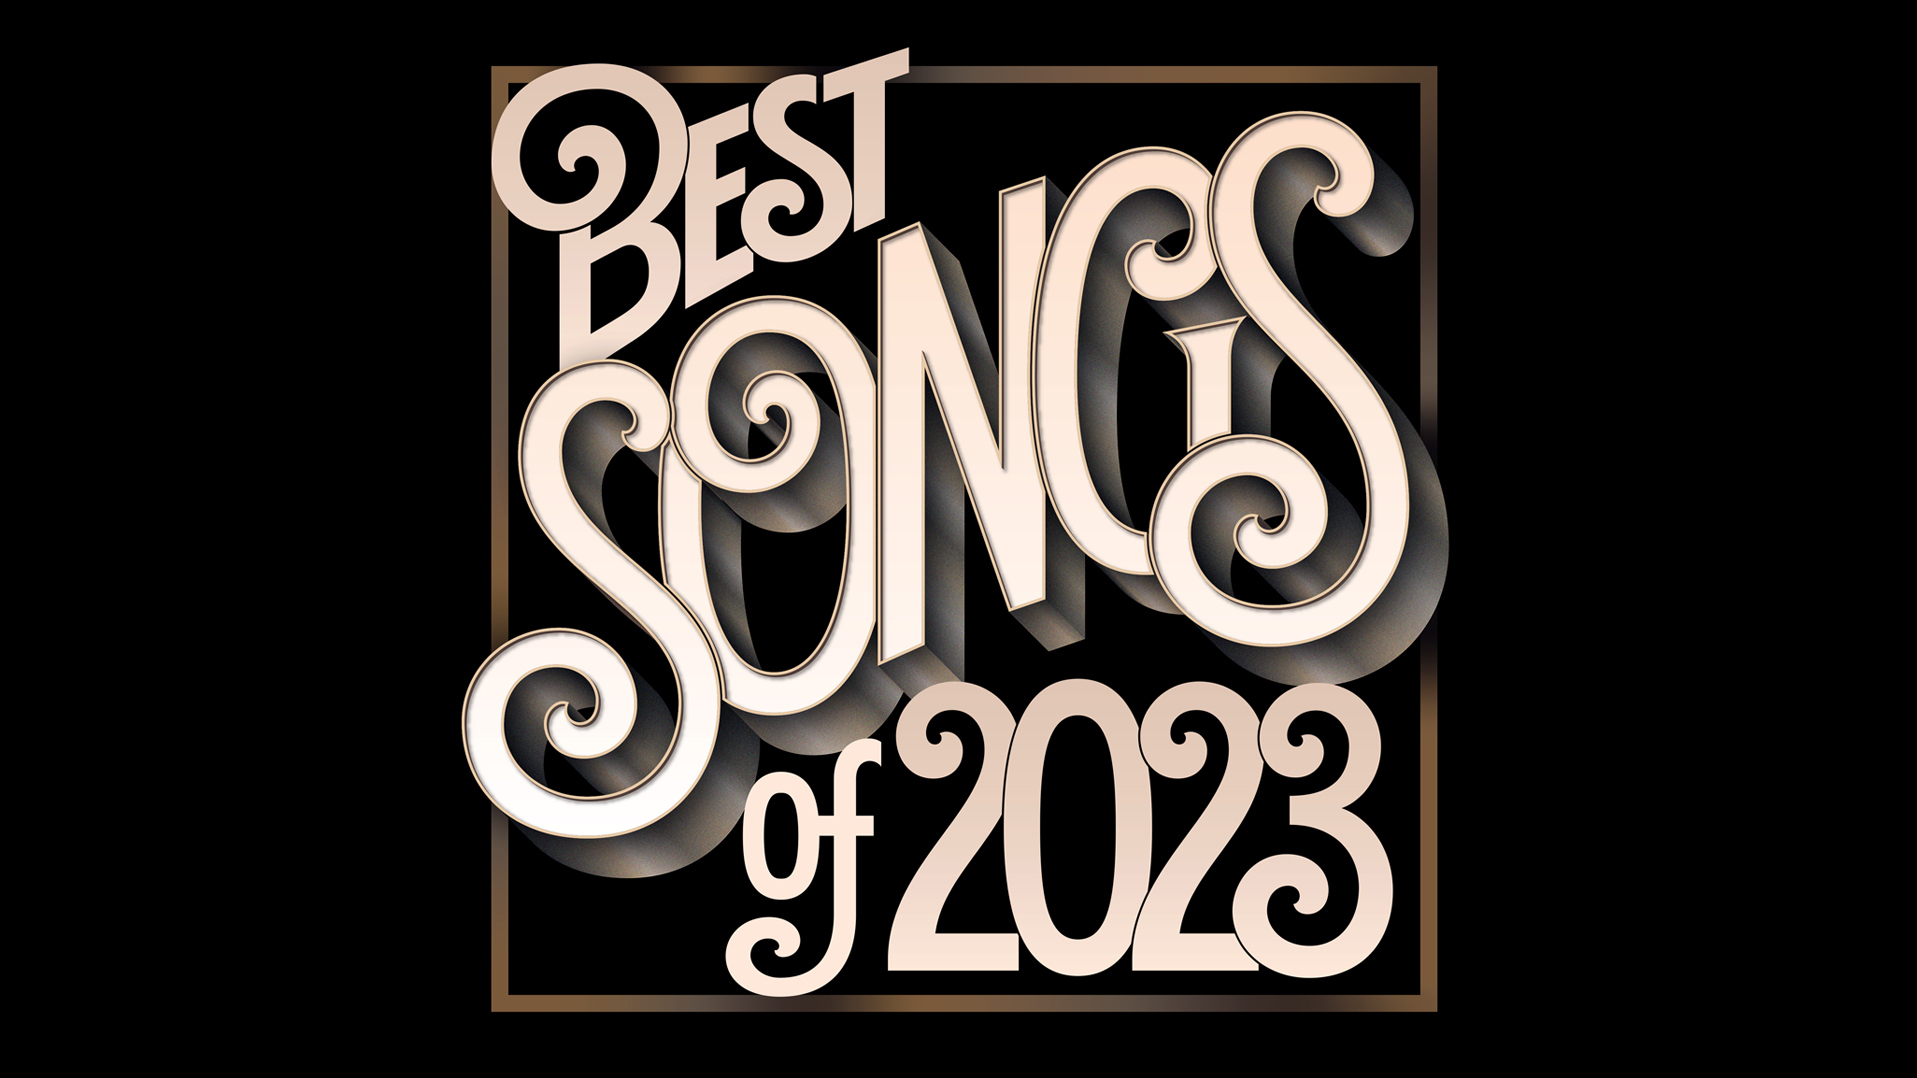 The best songs of 2023